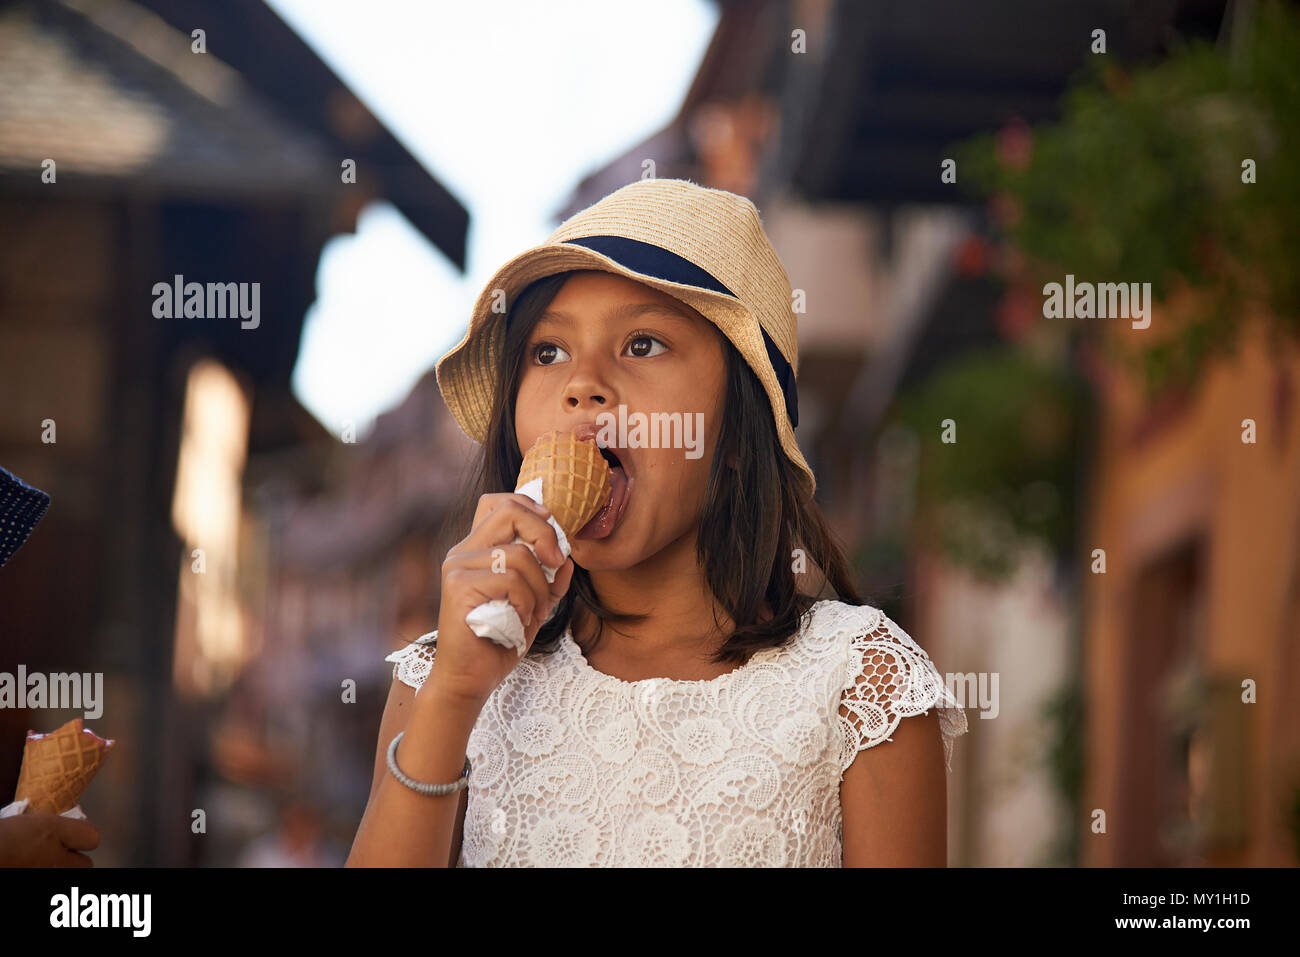 Little cute Asian girl wearing a straw hat eating icecream whilst on holiday in the Alsace region of France in summer sunshine on a hot day Stock Photo